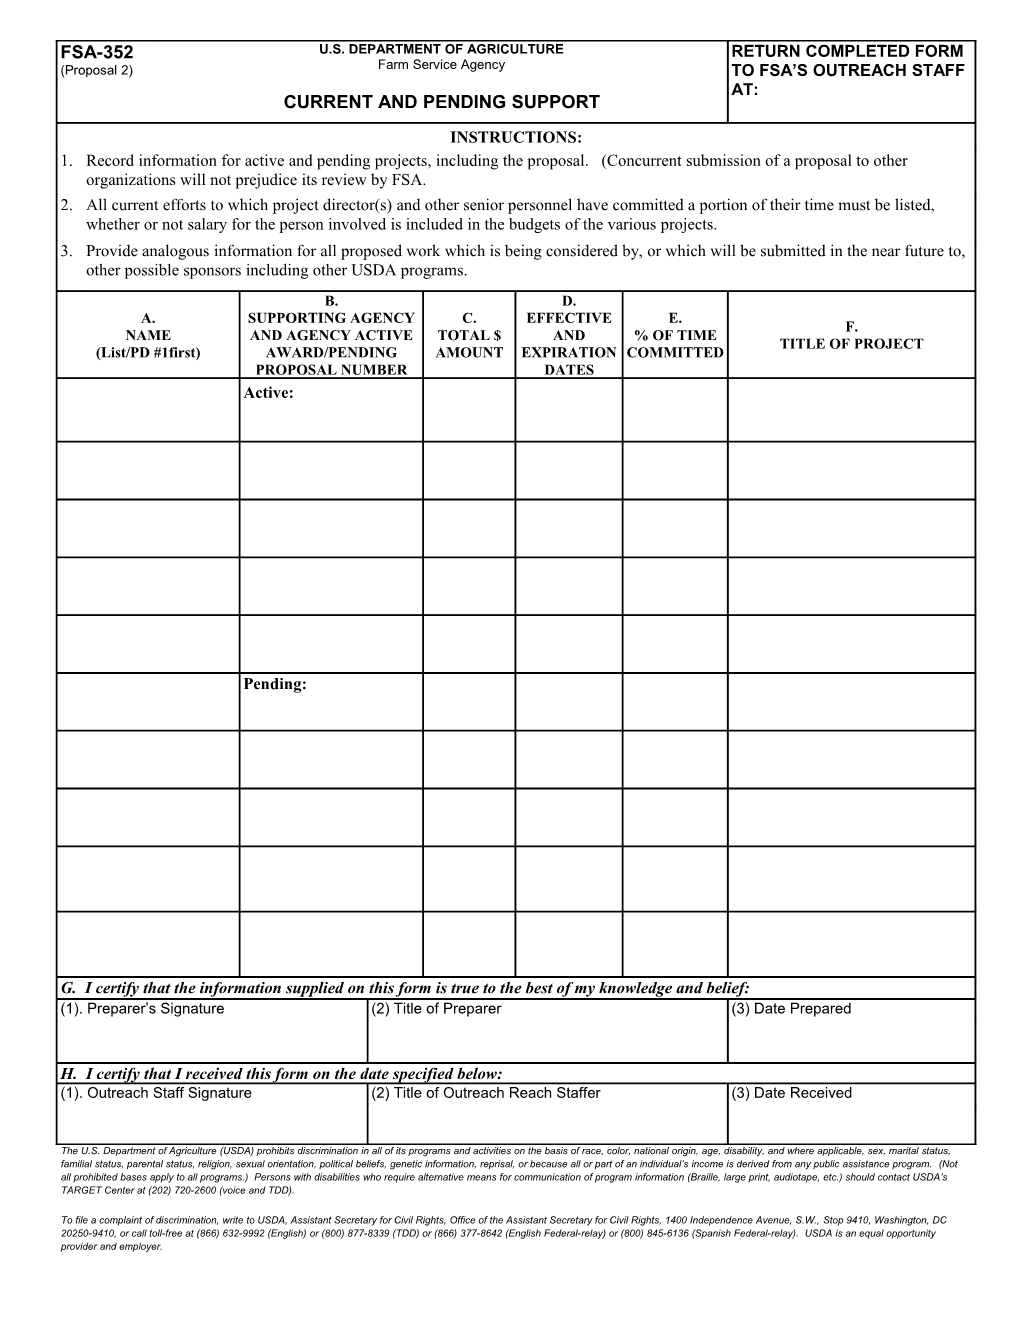 Return Completed Form to Fsa S Outreach Staff At